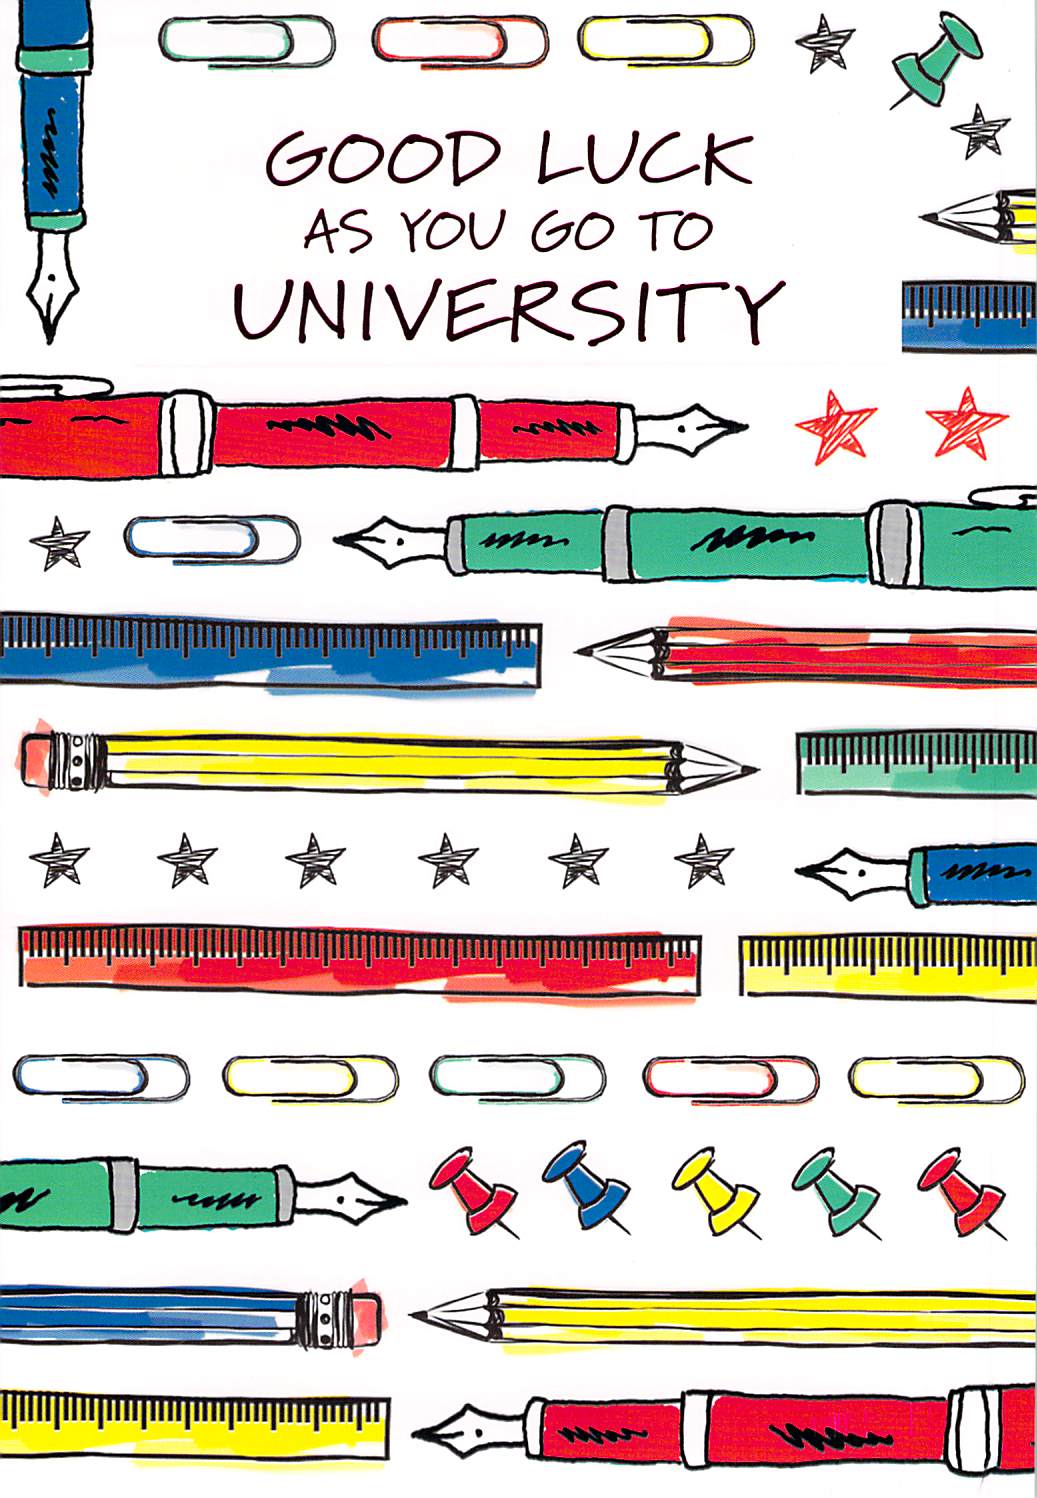 Good Luck As You Go To University - Stationary - Greeting Card - Free Postage